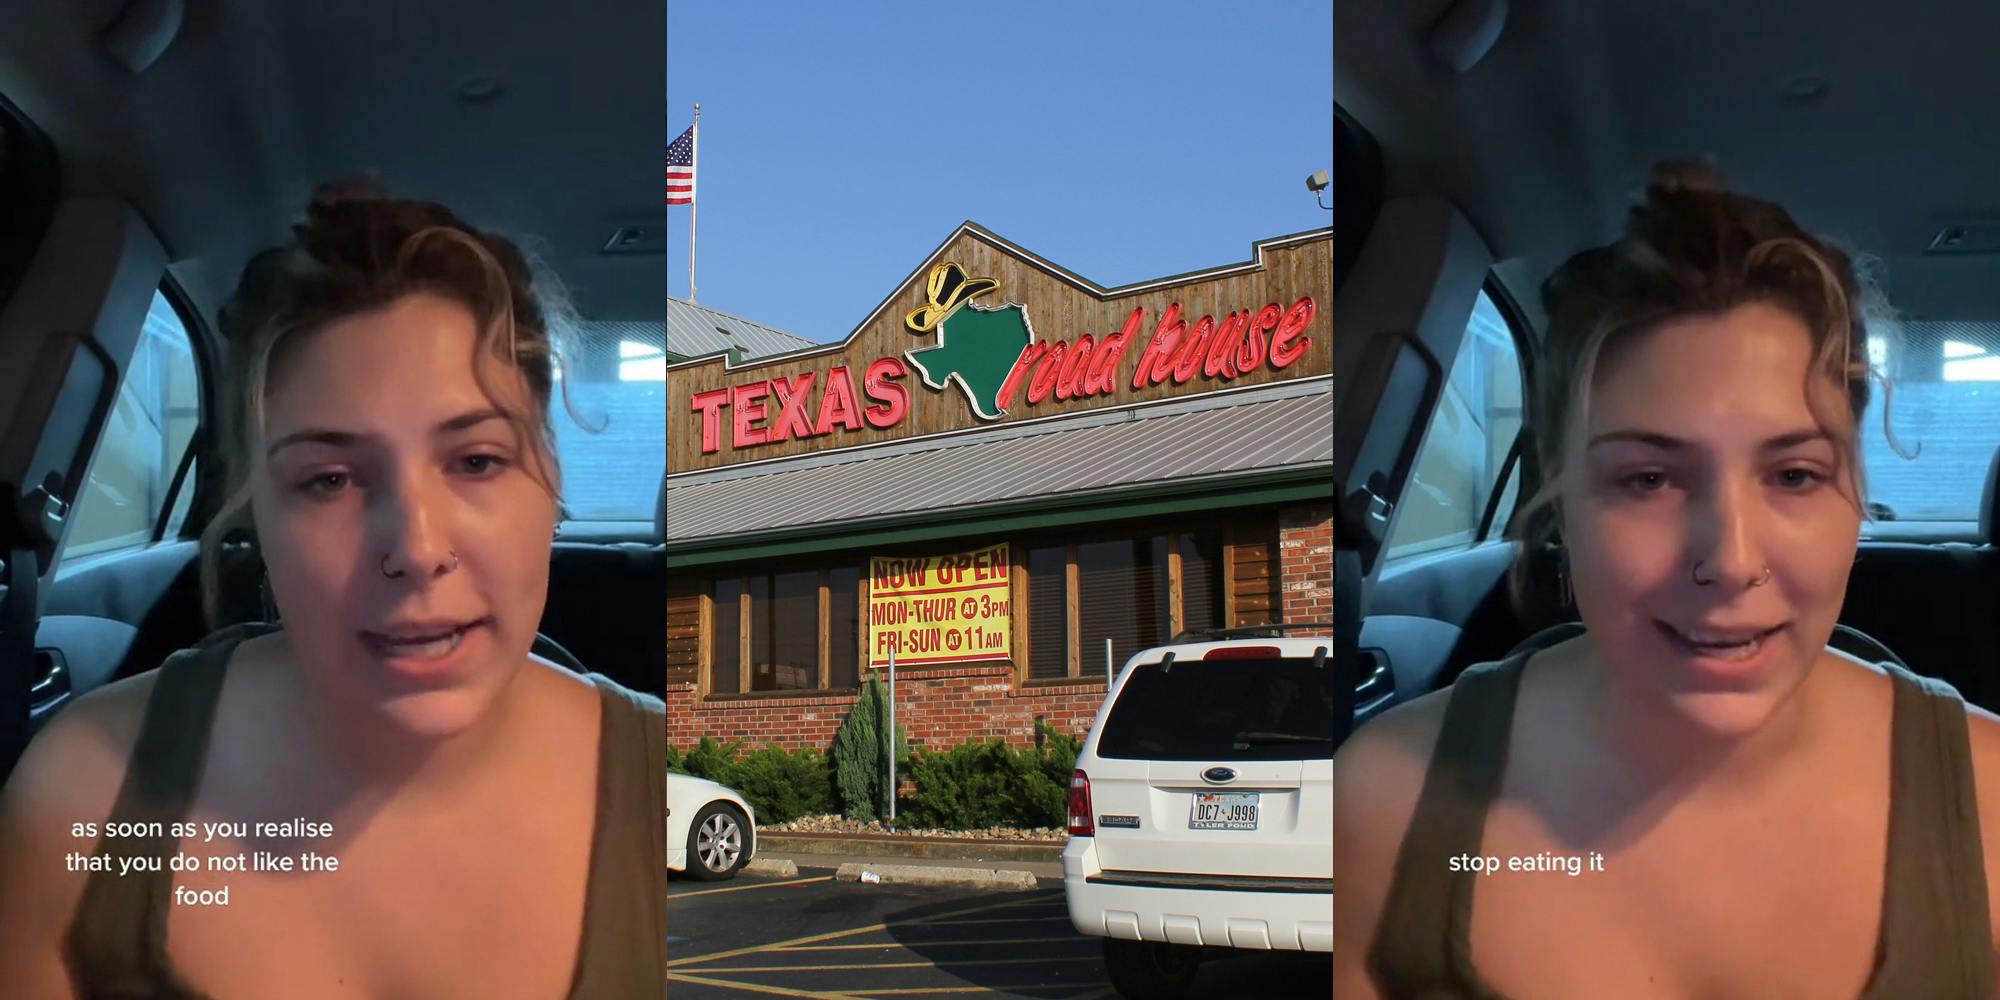 Texas Roadhouse server speaking in car with caption "as soon as you realize that you do not like the food" (l) Texas Roadhouse building with sign (c) Texas Roadhouse server speaking in car with caption "stop eating it" (r)